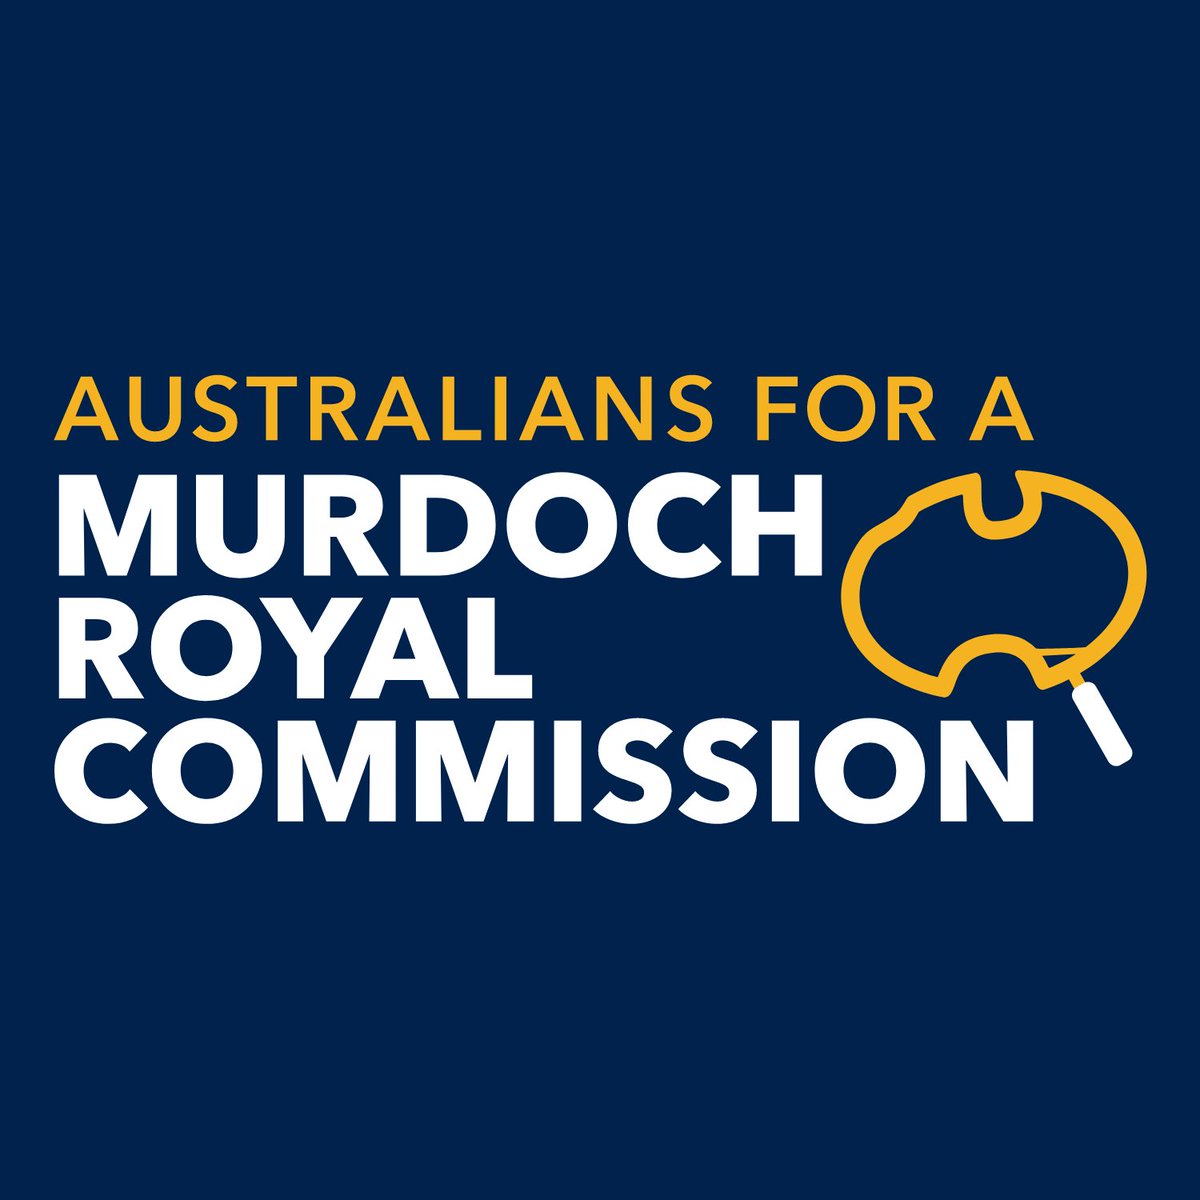 @djrothkopf Not ‘happy day’ friend. Business as usual at #MurdochSewerageCo.That is fact.
Misleading announcement, is their lawyers attempt to get ahead of #MurdochShareholders who believe Murdoch recklessness cost them millions. Real discussion?
Impact of their lies on #democracy.#auspol